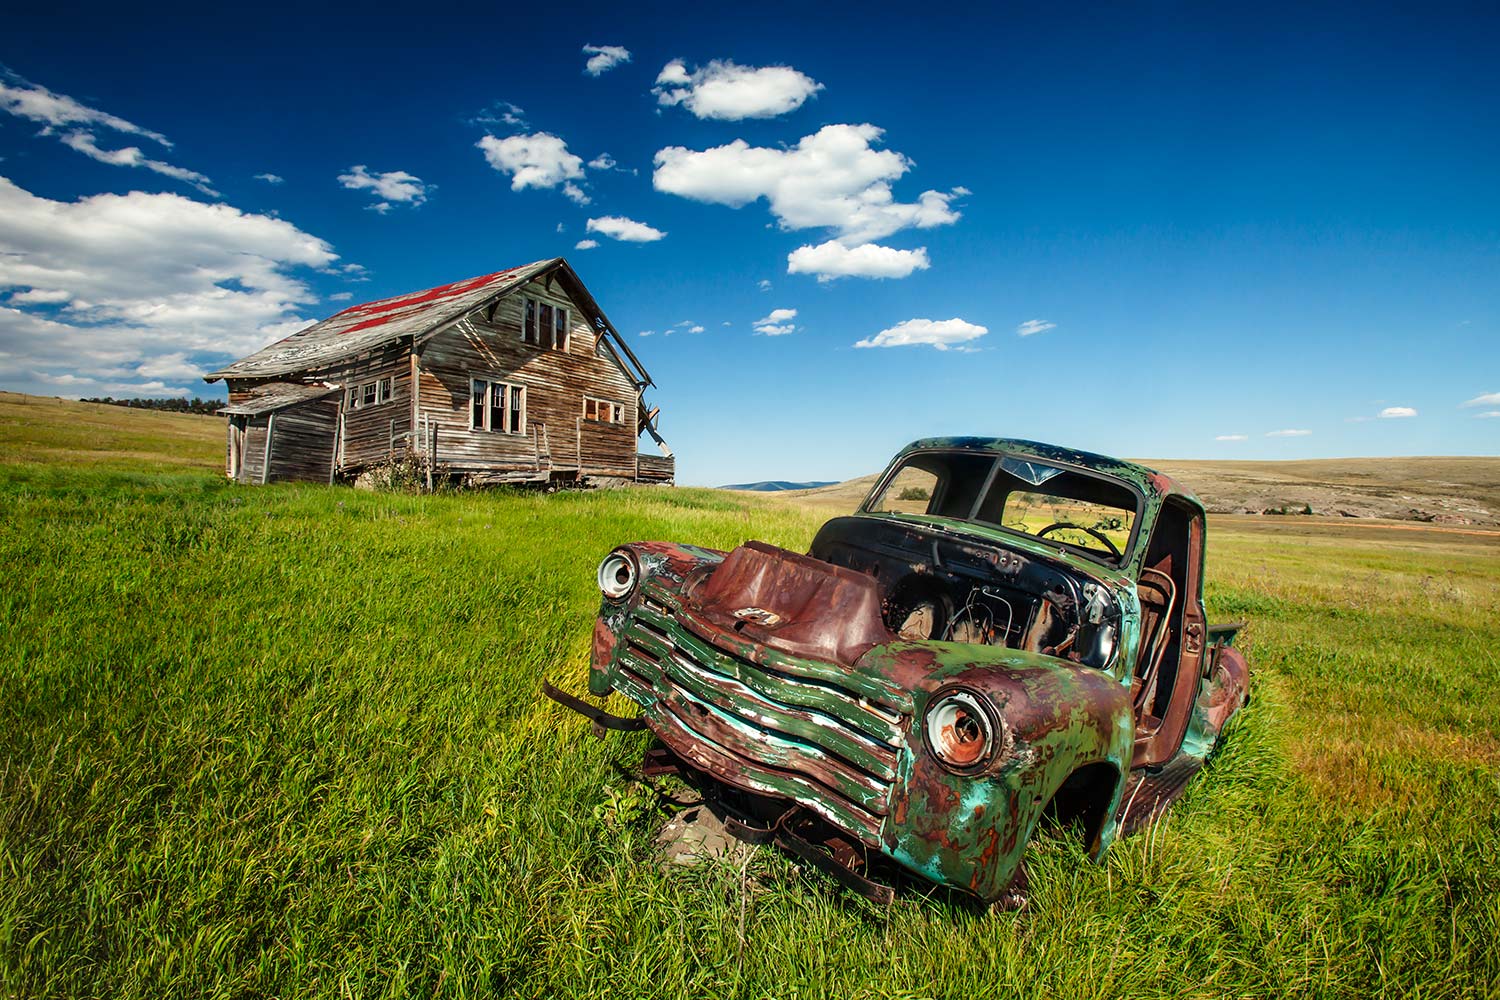 An old house and a rotting jalopy near Lingshire, Montana.&nbsp;→ Buy a Print&nbsp;or License Photo